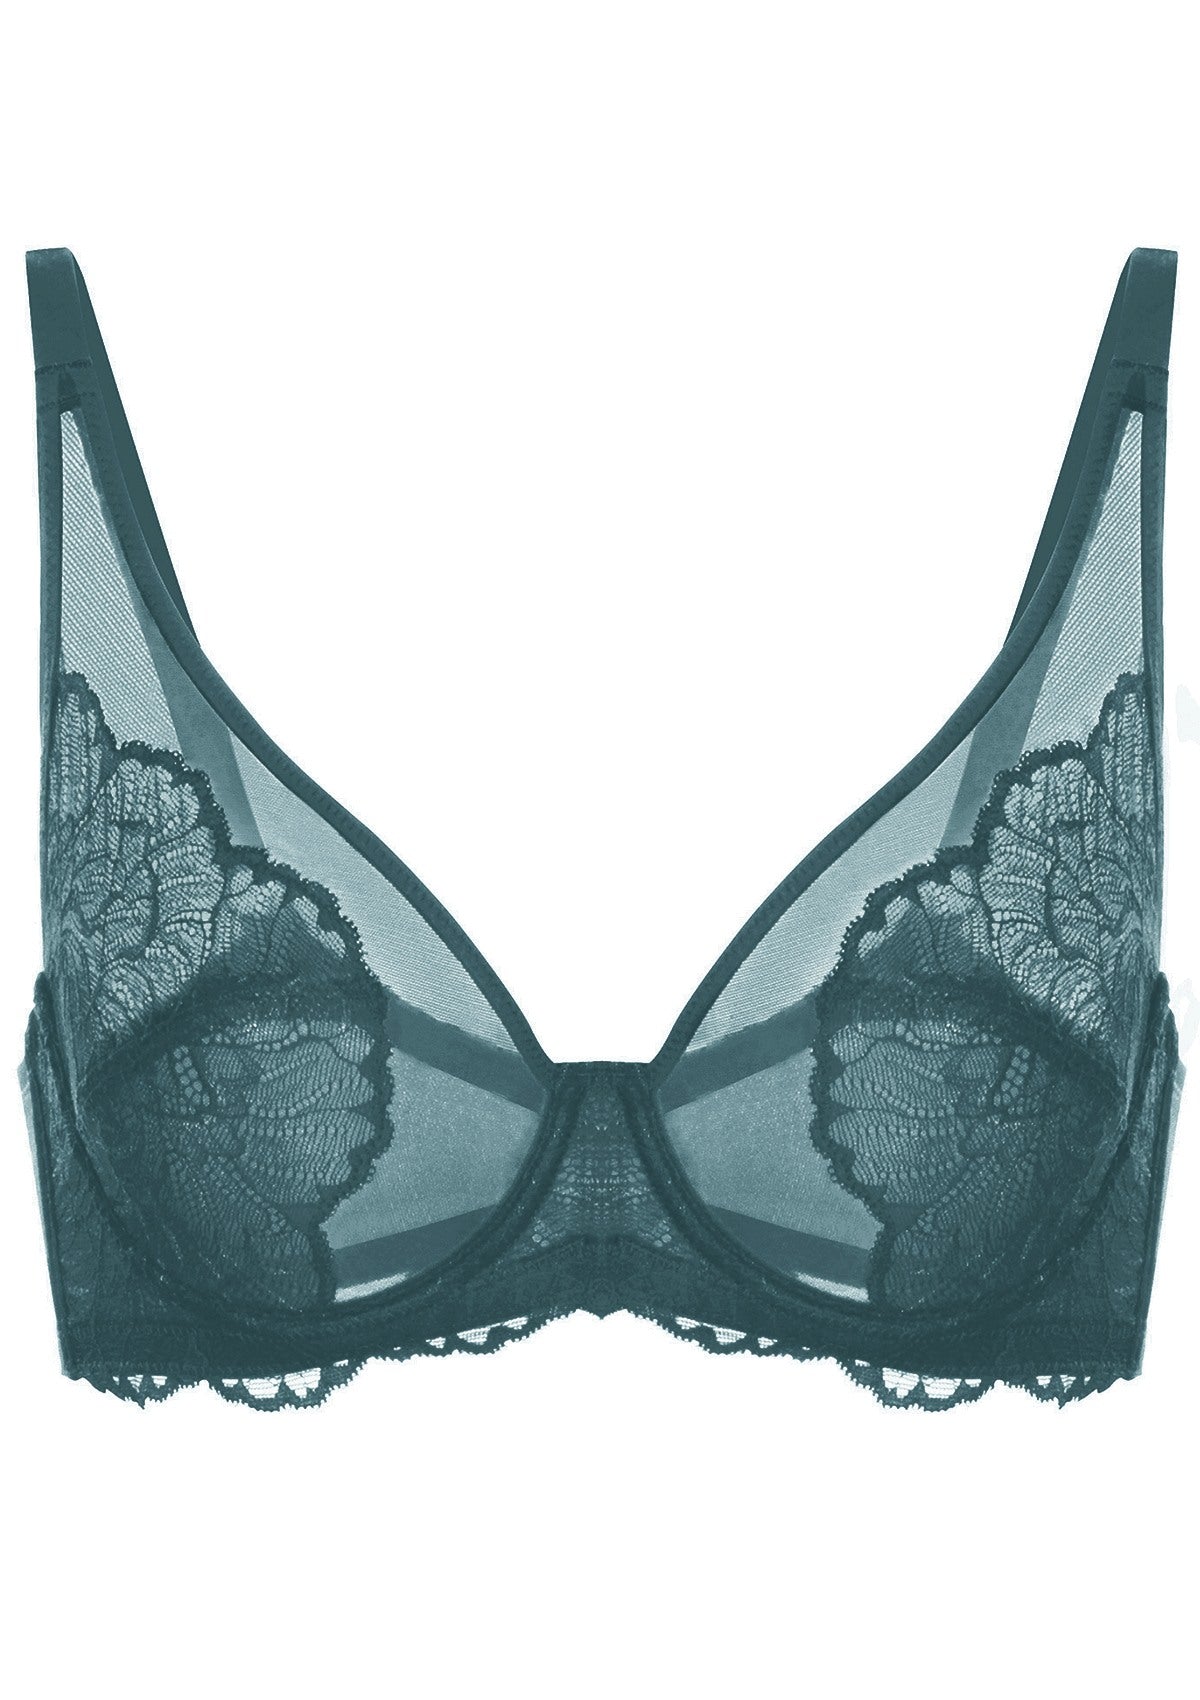 HSIA Blossom Full Figure See-Through Lace Bra For Side And Back Fat - Biscay Blue / 40 / D